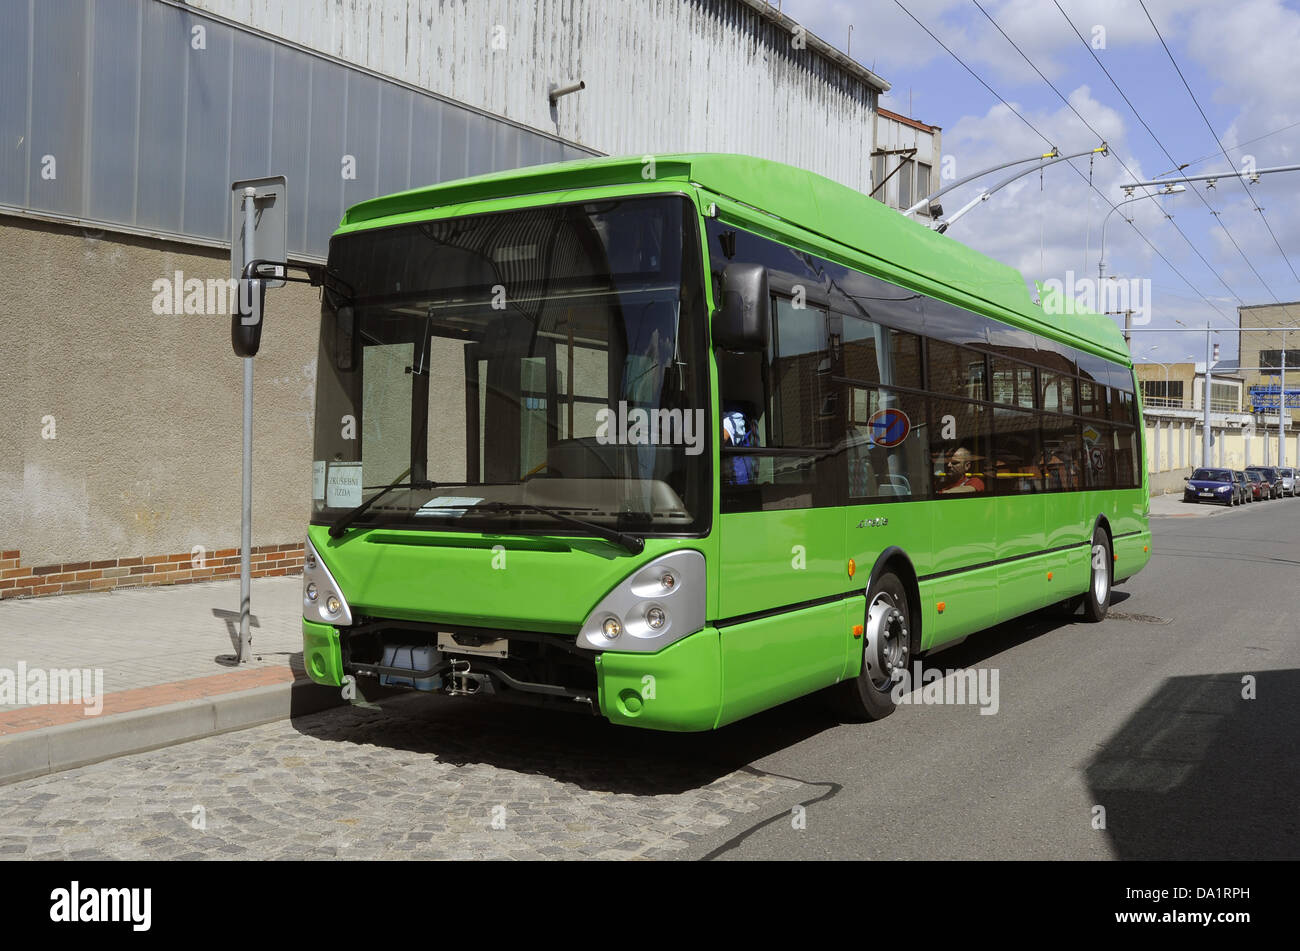 Skoda Electric, a subsidiary of Skoda Transportation, signed two major contracts for 130 trolley buses for 1.8 billion crowns. The Bulgarian capital Sofia will buy 50 buses for nearly 700 million crowns. Bratislava will buy 80 buses for 1.1 billion crowns. Pictured the new trolley during a test drive in the streets of Pilsen, Czech Republic, July 1, 2013. (CTK Photo/Petr Eret) Stock Photo